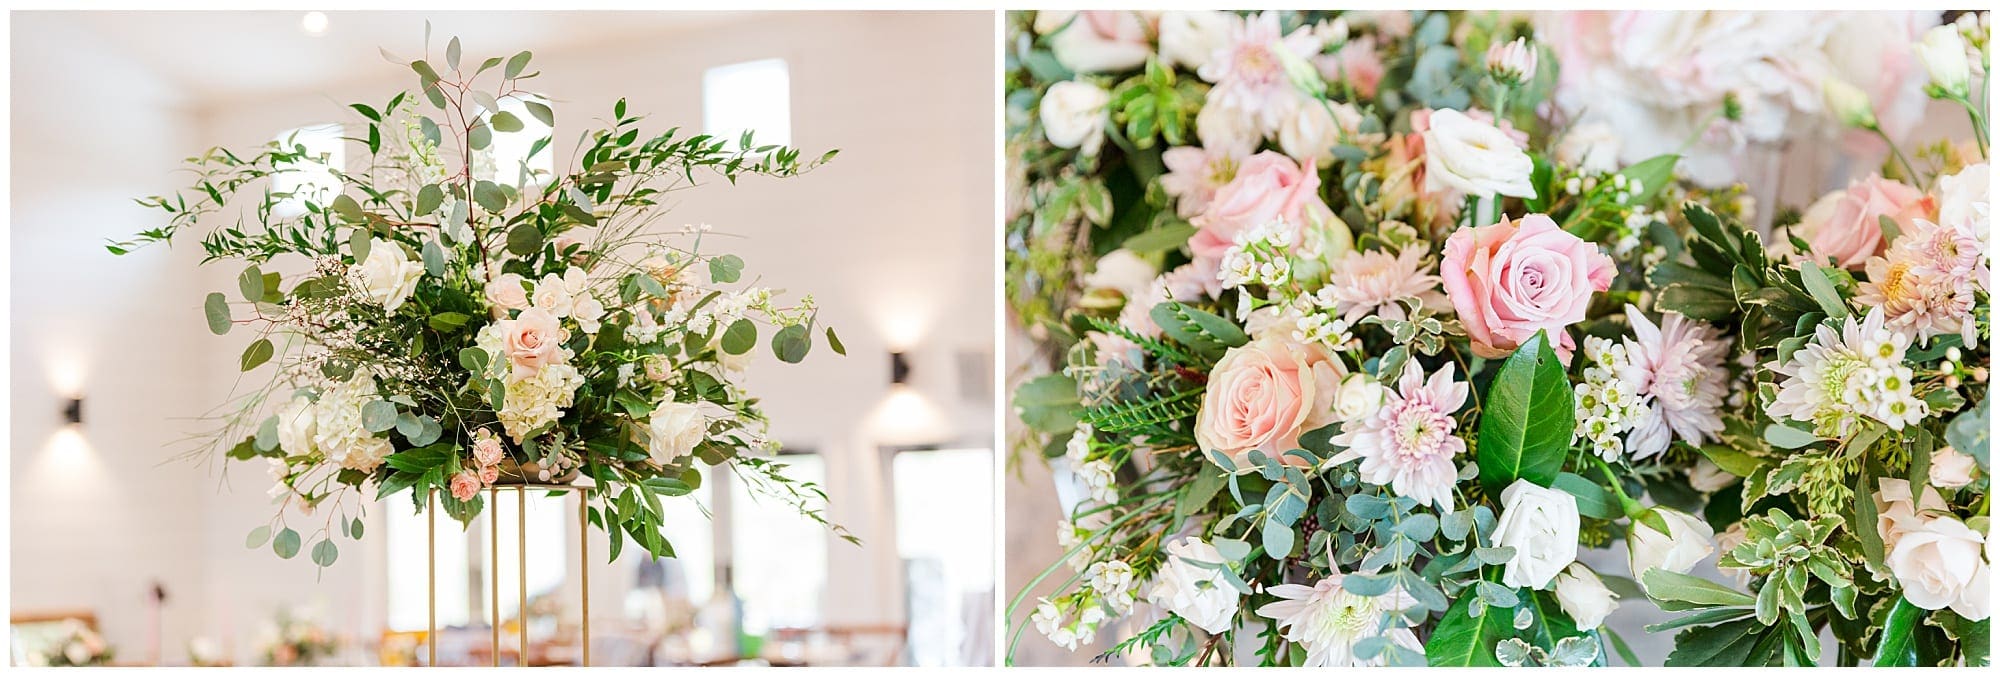 Gorgeous spring colors of pinks with greenery